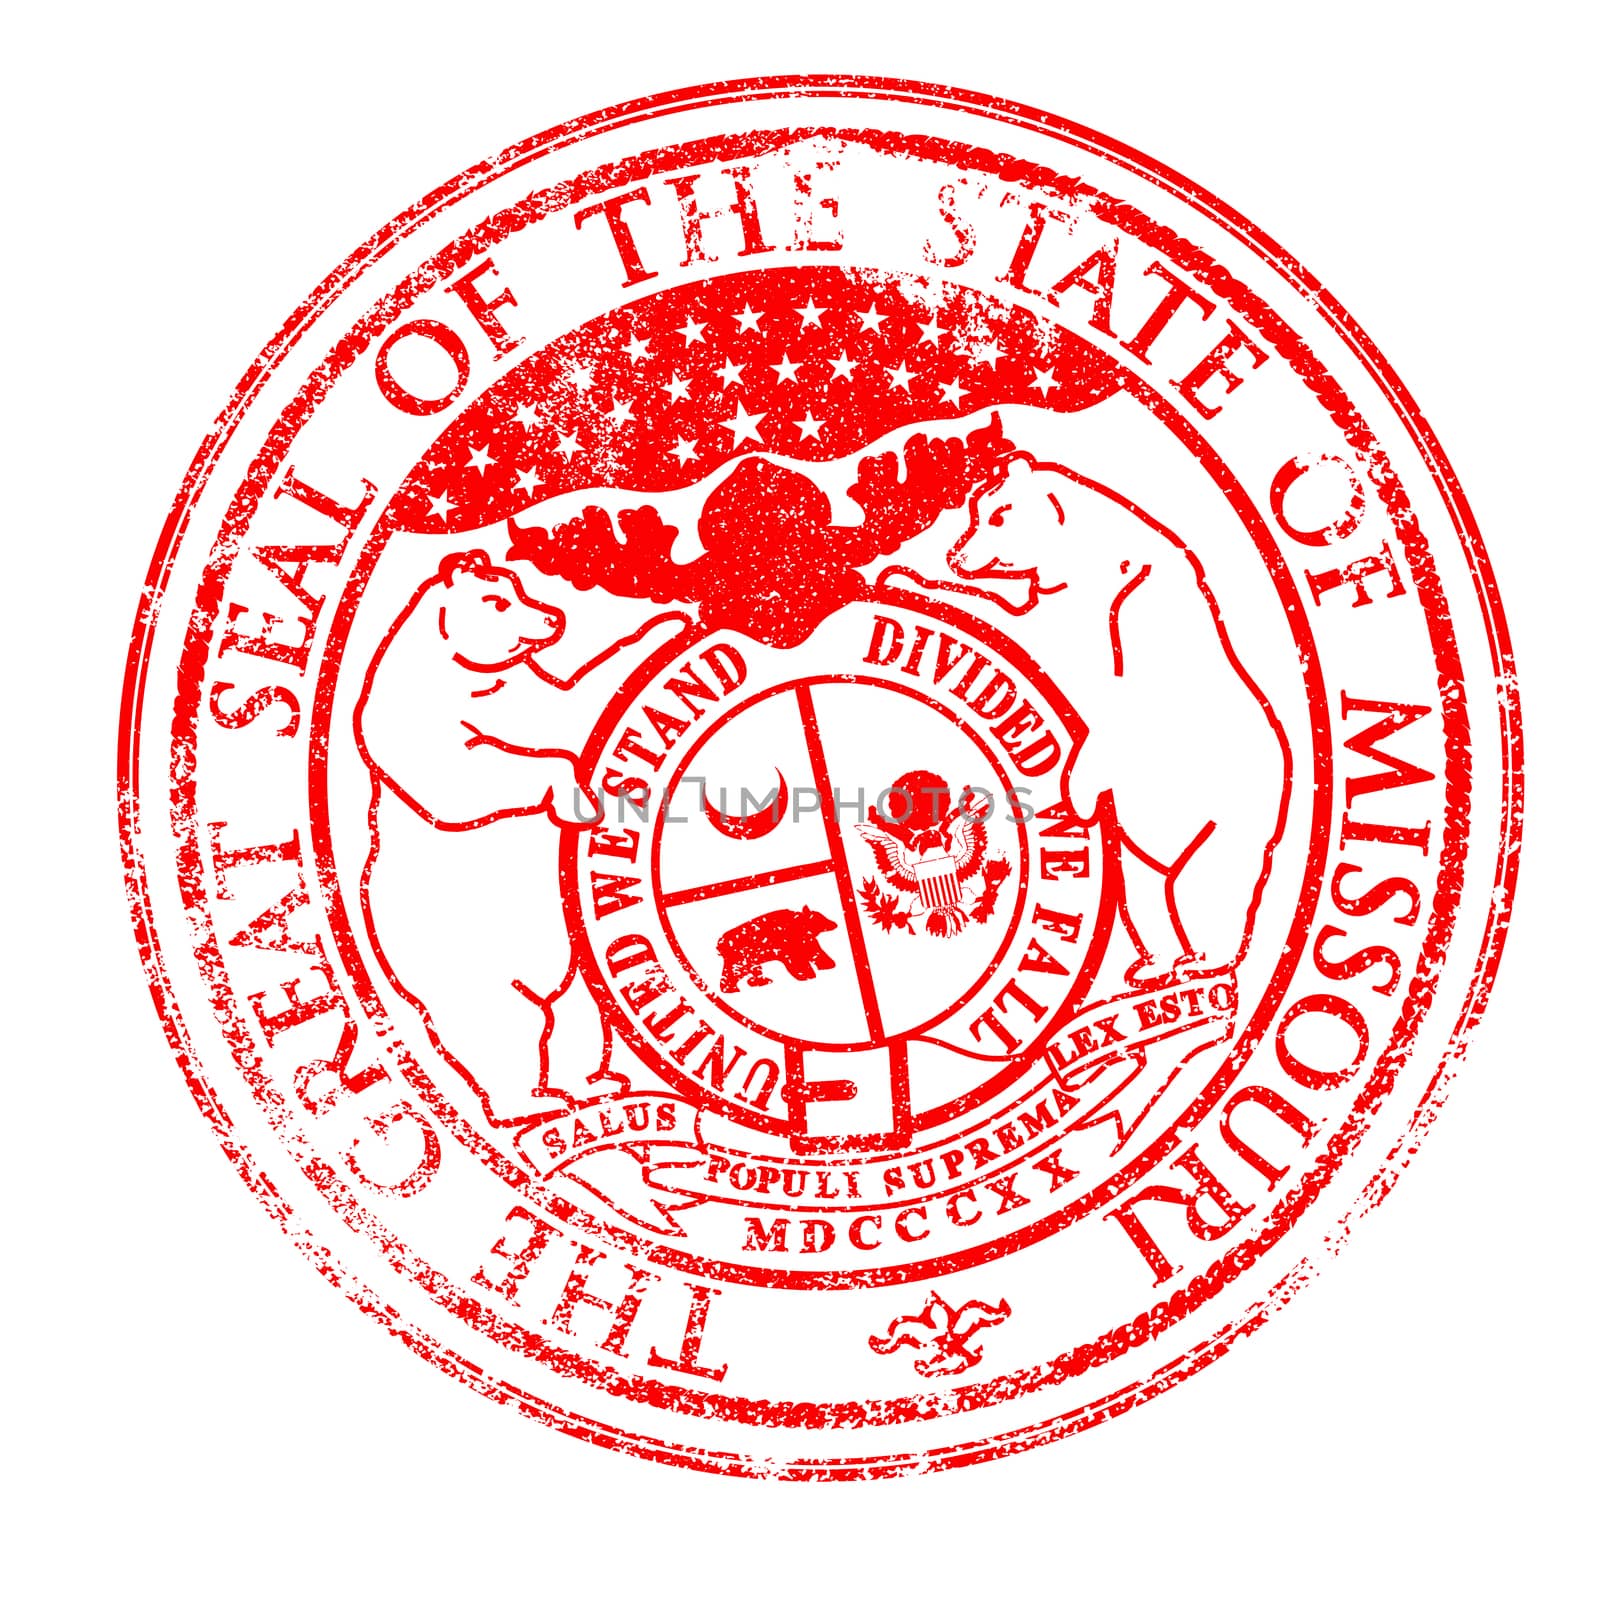 The State Seal of Missouri rubber stamp on a white background